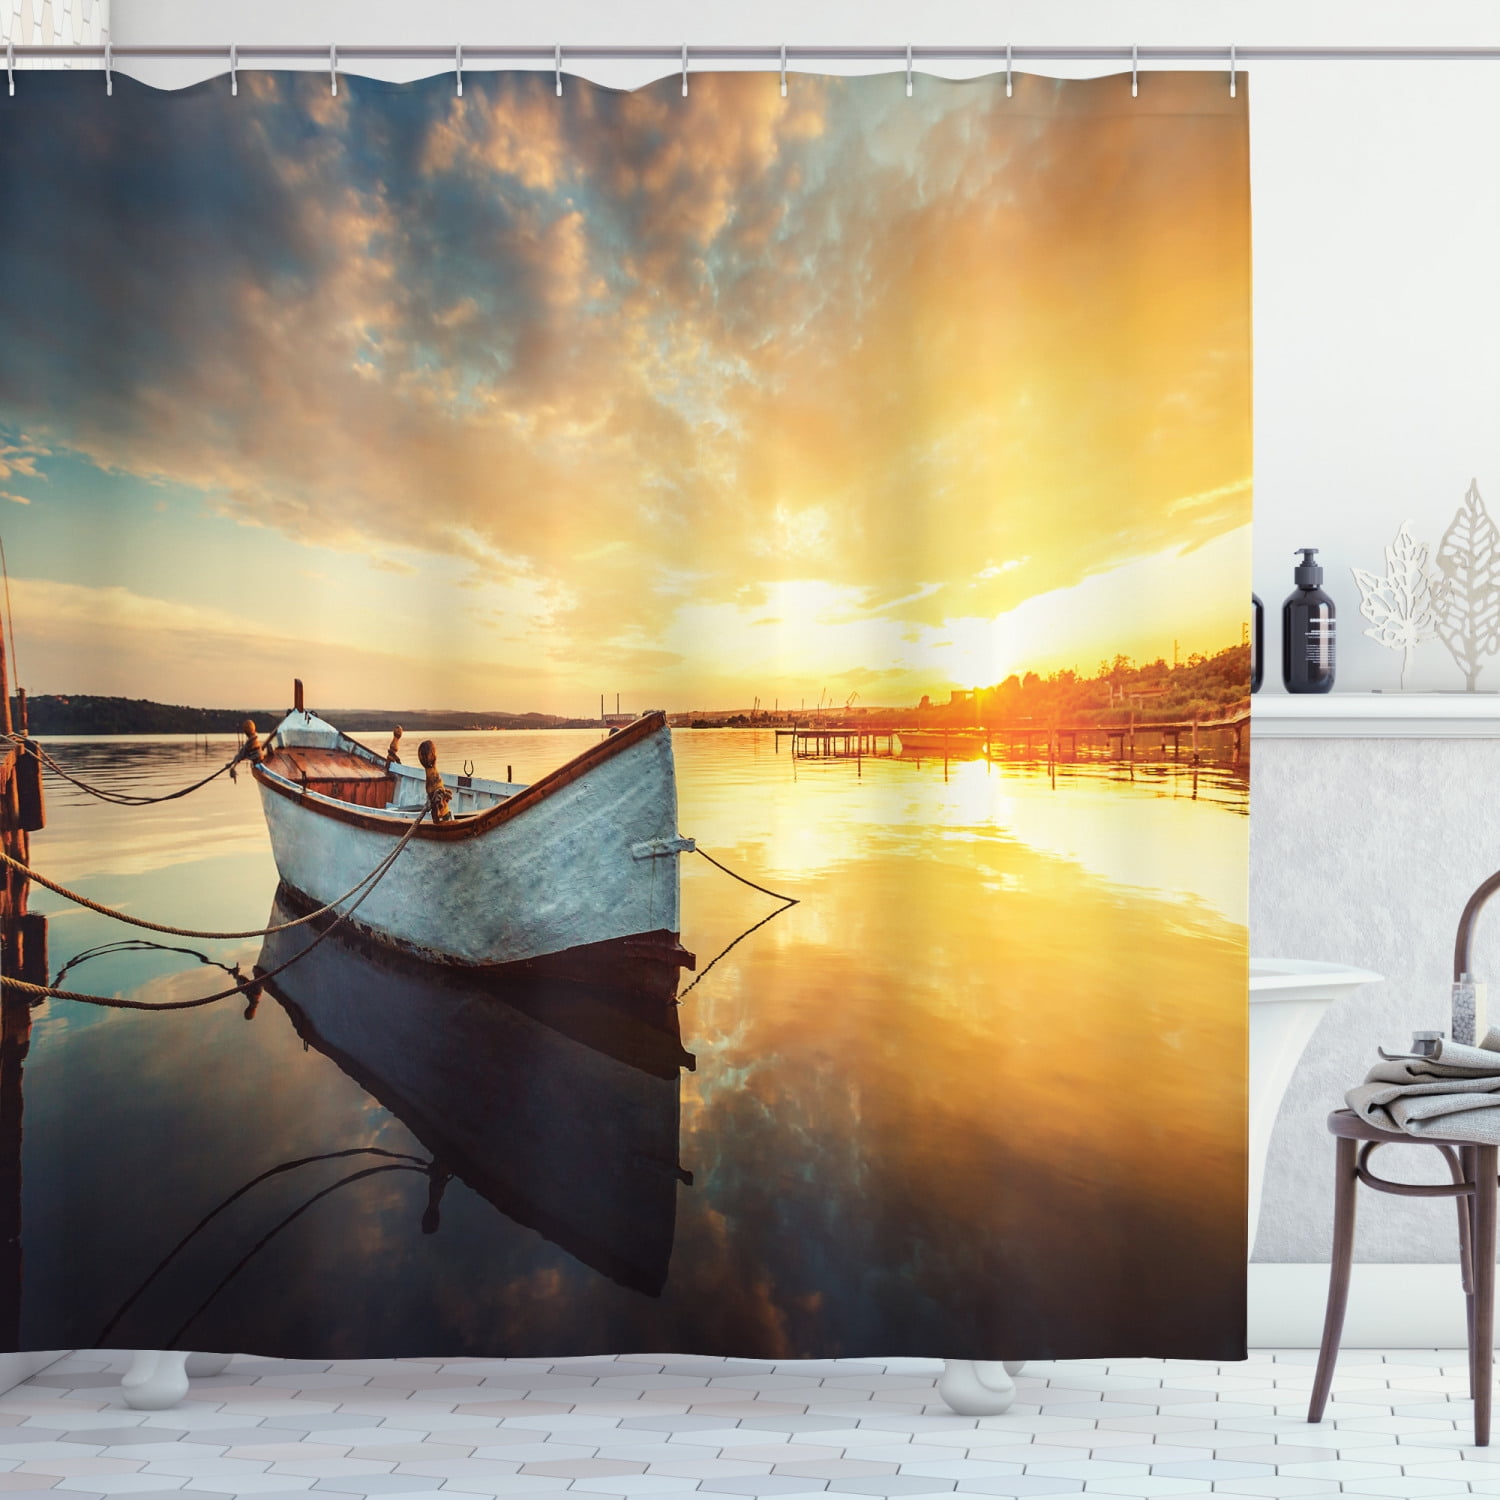 Lake House Shower Curtain Small Boat, Harbor House Shower Curtain